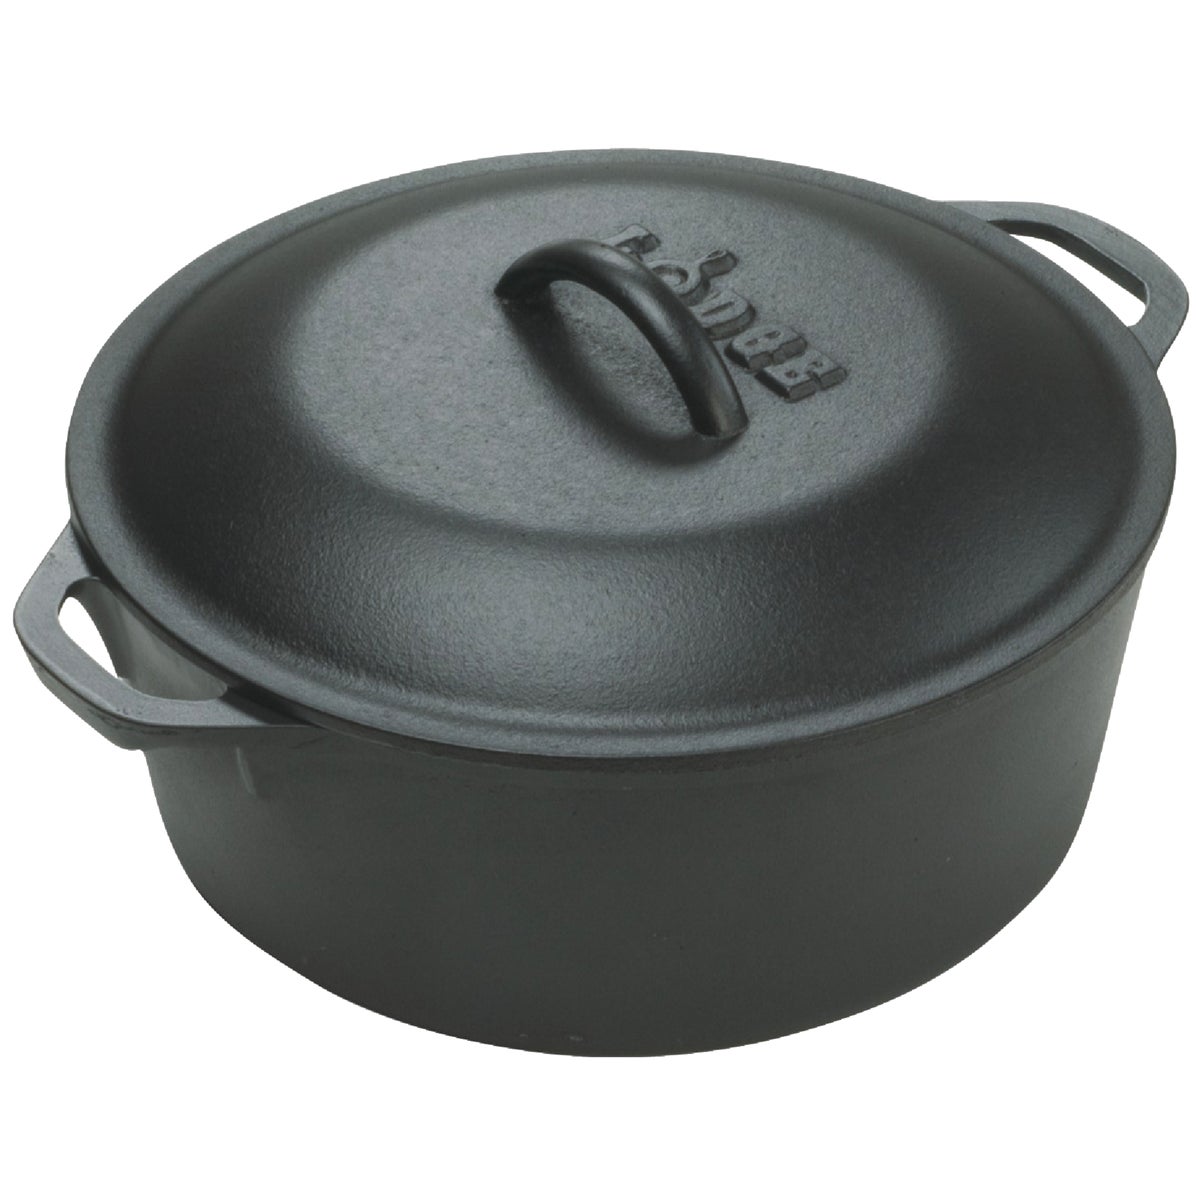 Item 602434, Cast-iron construction provides even heat distribution for best cooking 